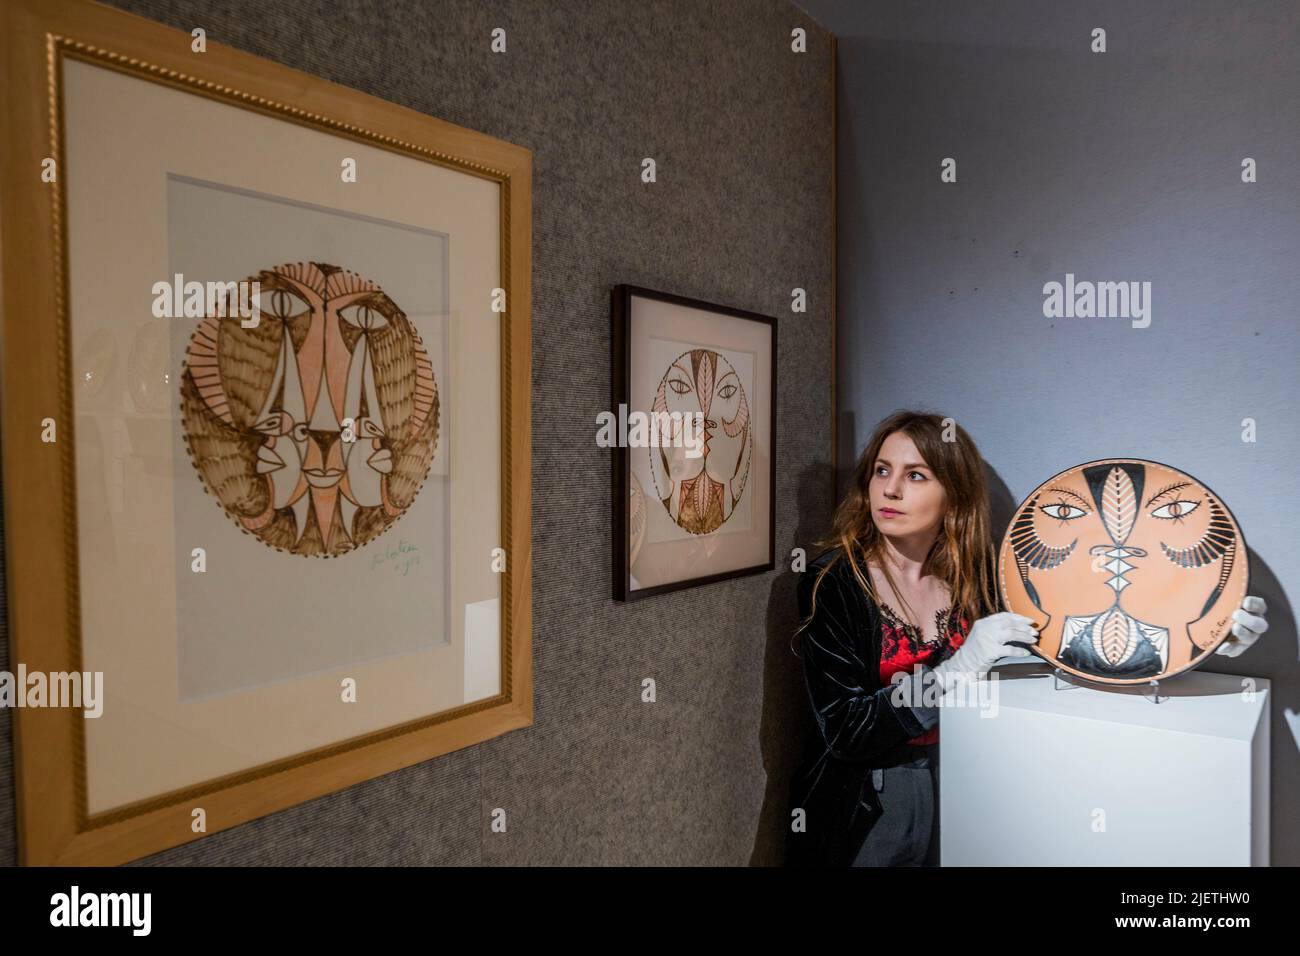 London, UK. 28th June, 2022. A Ceramic Plate, est €4-5000 with pre production sketches - A preview of Bonhams' Jean Cocteau and the Madeline-Jolly Workshop sale in New Bond Street. The sale takes place on 29 September 2022, in Paris. Credit: Guy Bell/Alamy Live News Stock Photo